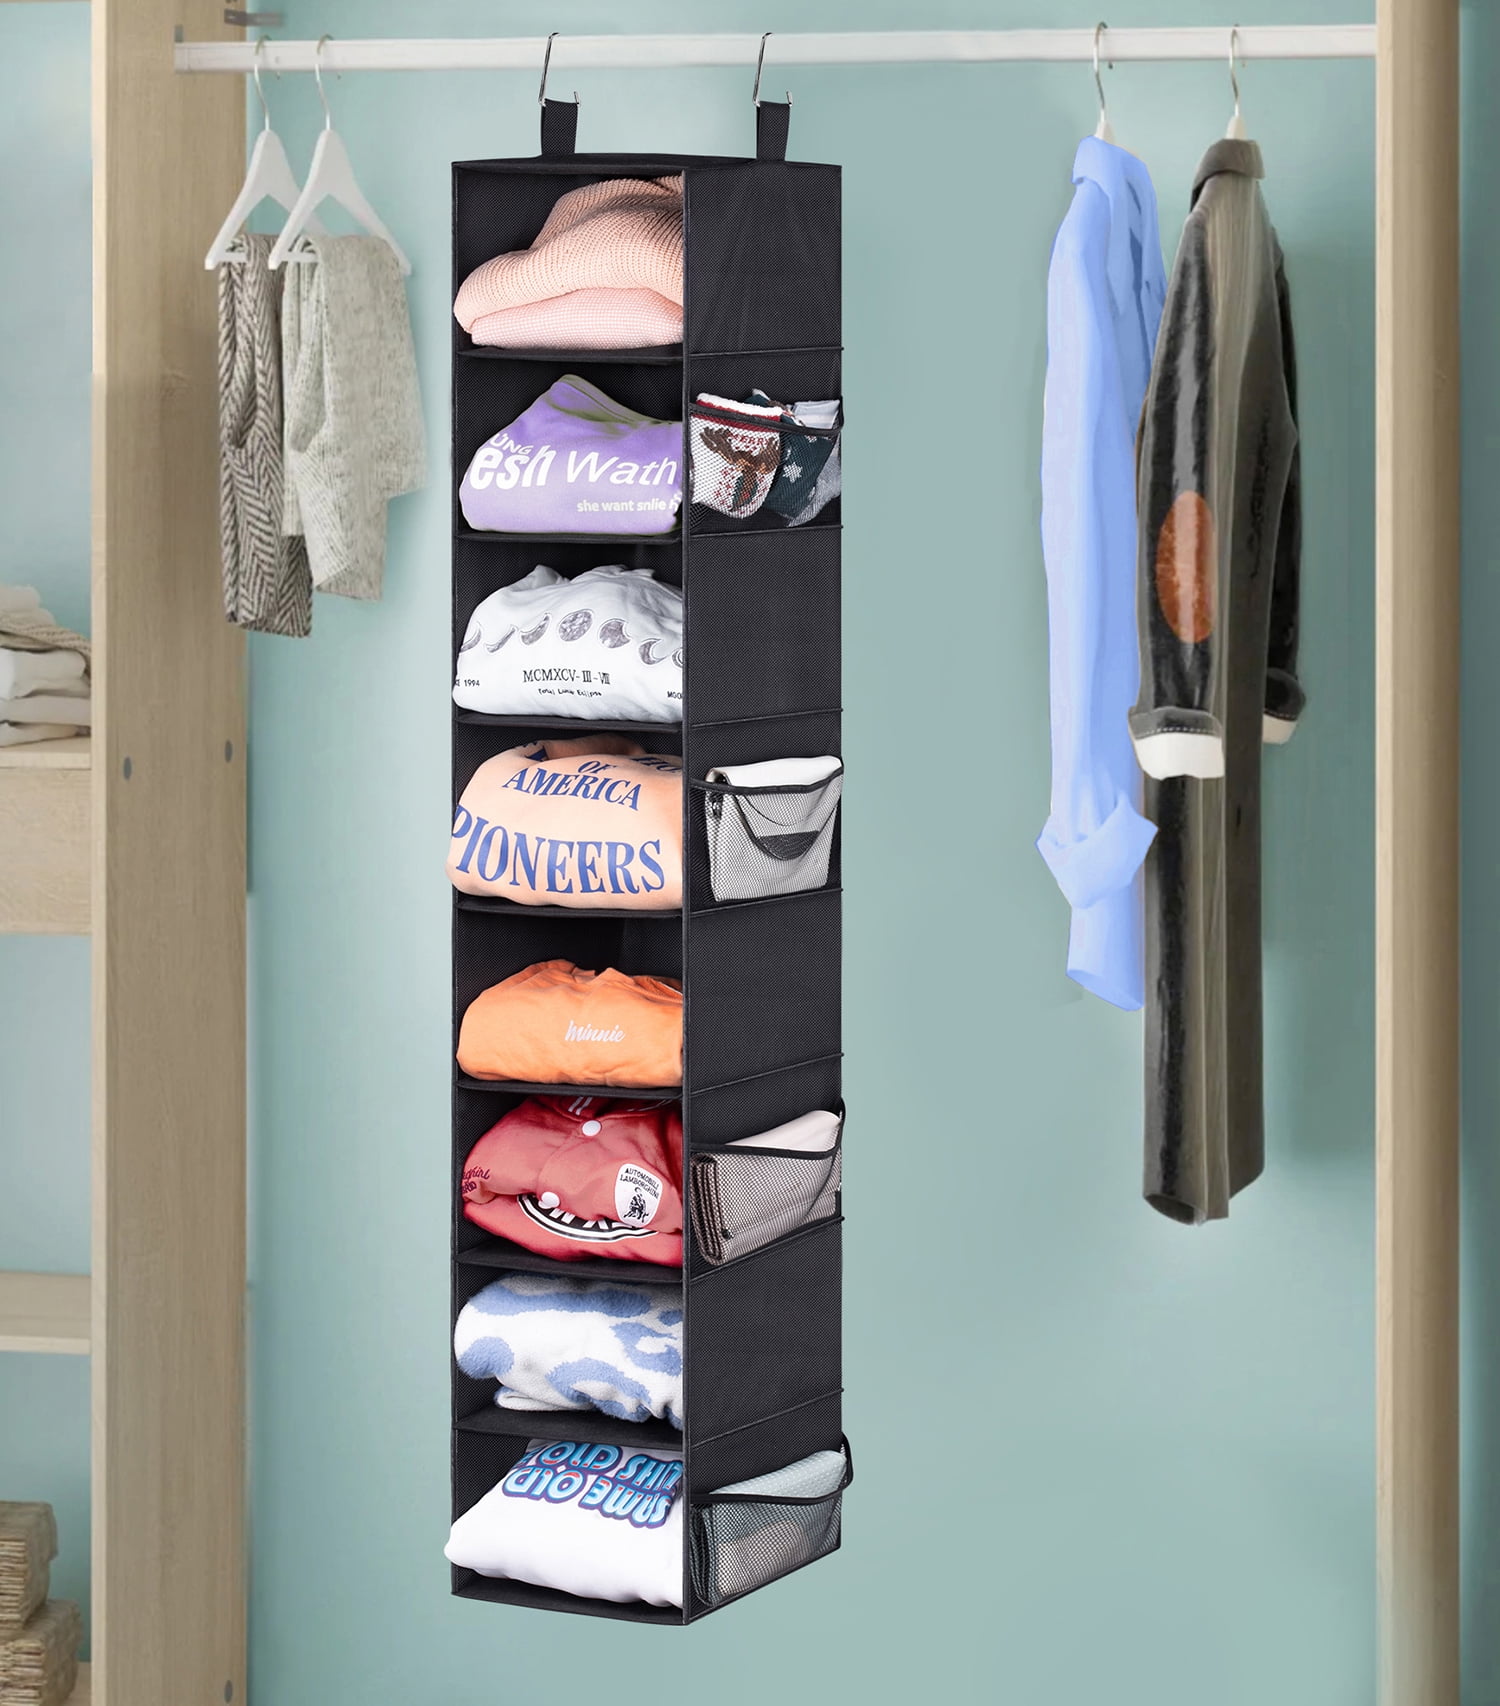 MISSLO 8-Shelf Hanging Shoe Organizer Clothes Closet Organizers and Storage  Shelves Hat Holder with Large Shelf and Side Mesh Pockets for Hats Handbags  Kid Sweater, Grey – Built to Order, Made in